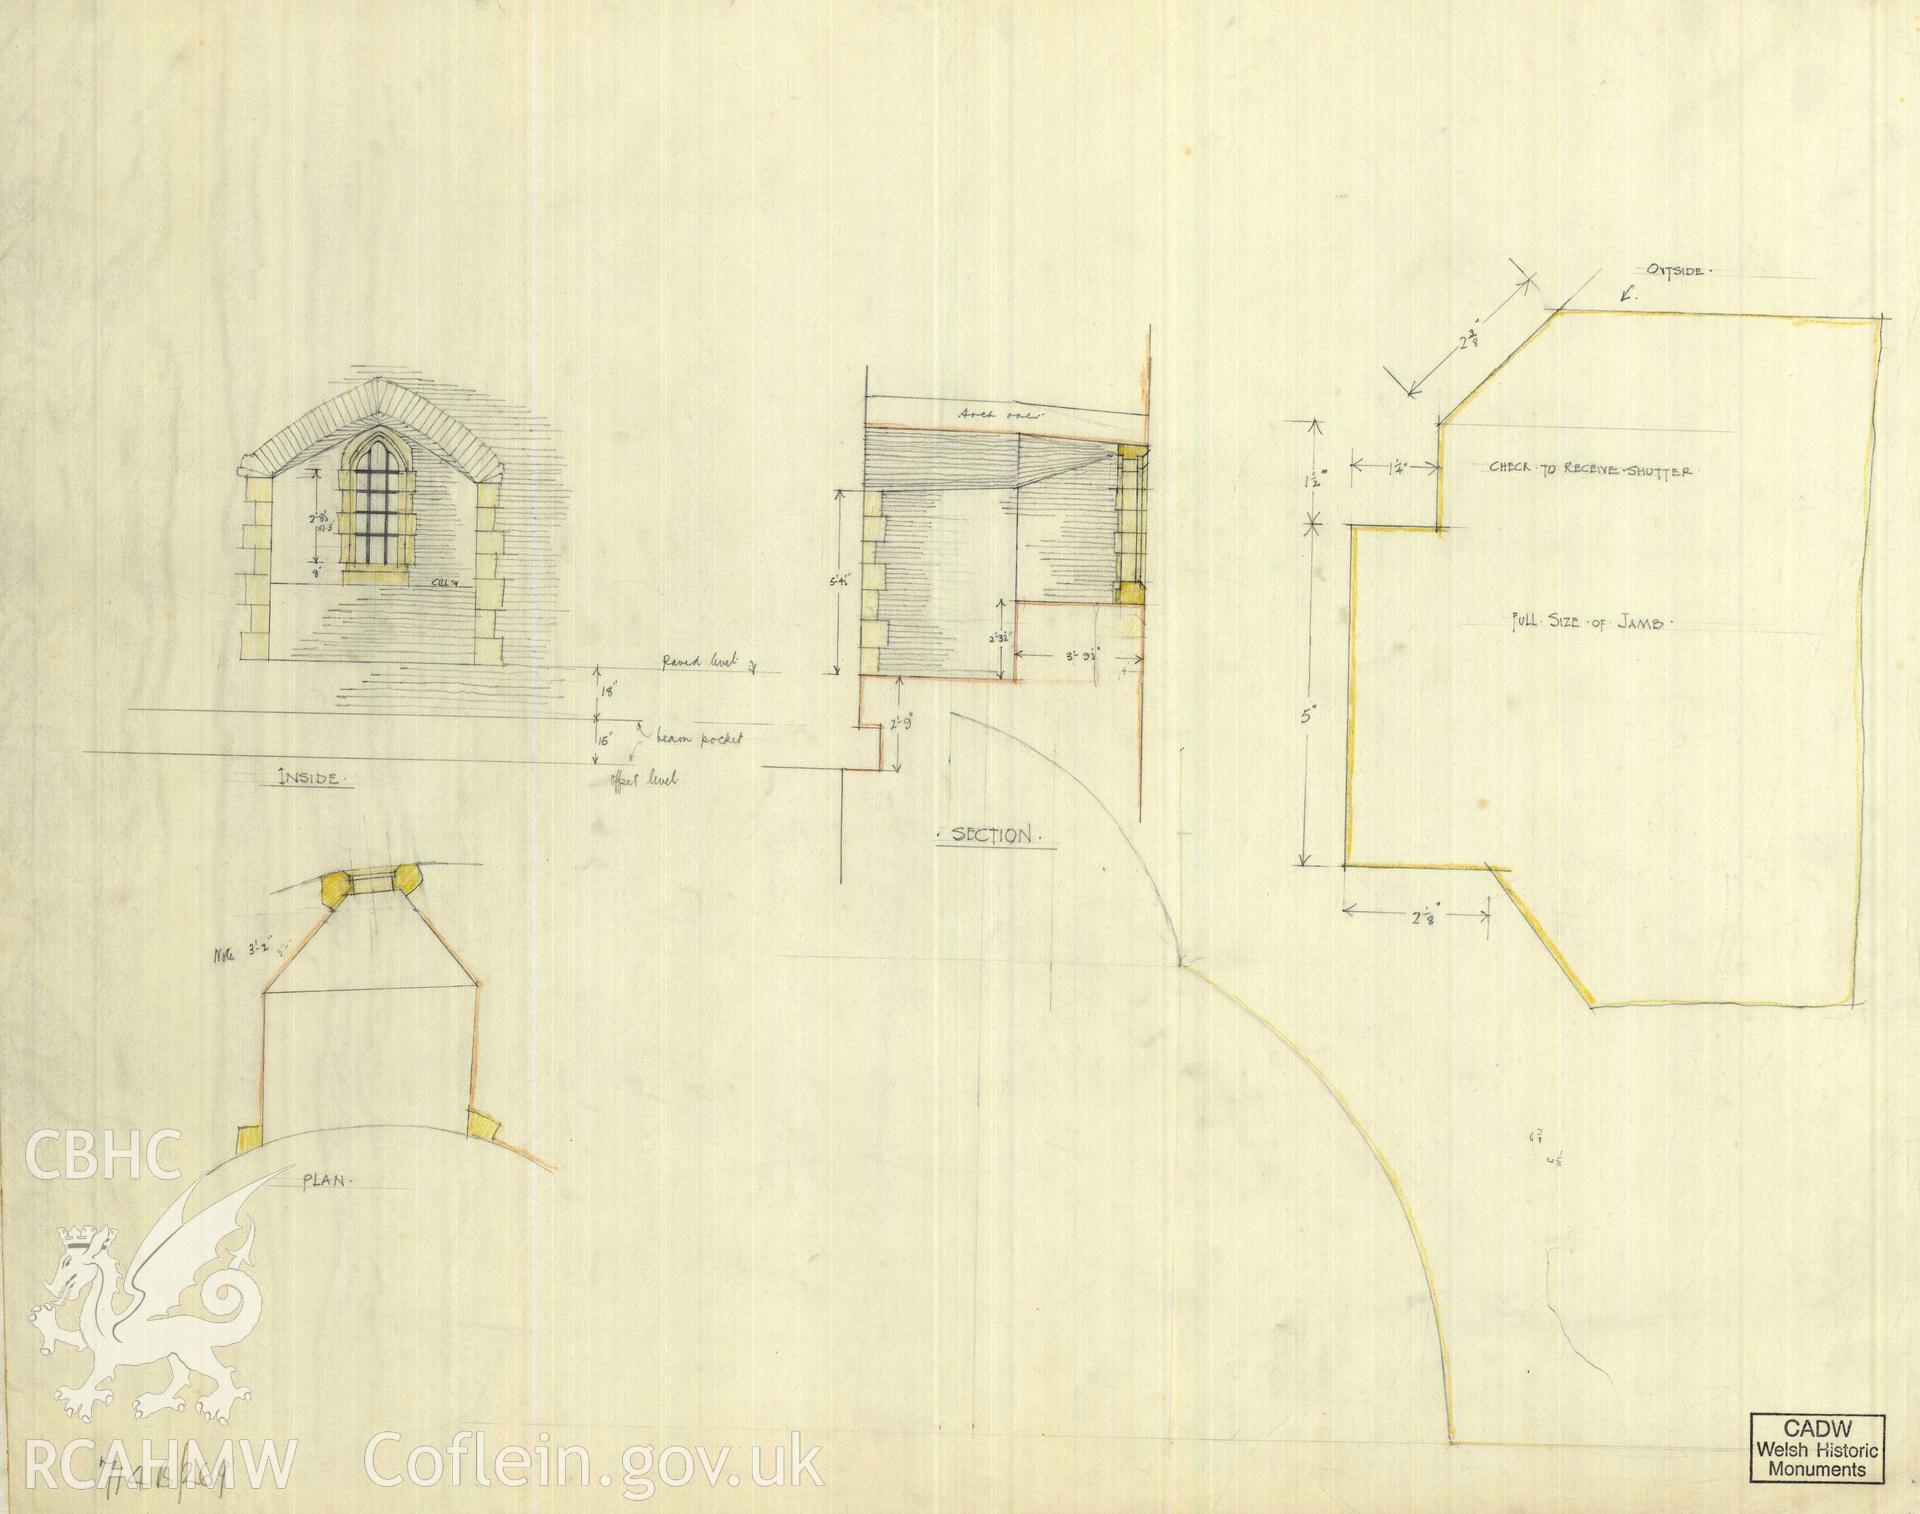 Cadw guardianship monument drawing of Caerphilly Castle. Inner E gate, upper floor window. Cadw Ref. No:714B/269. Scale 1:24.1.